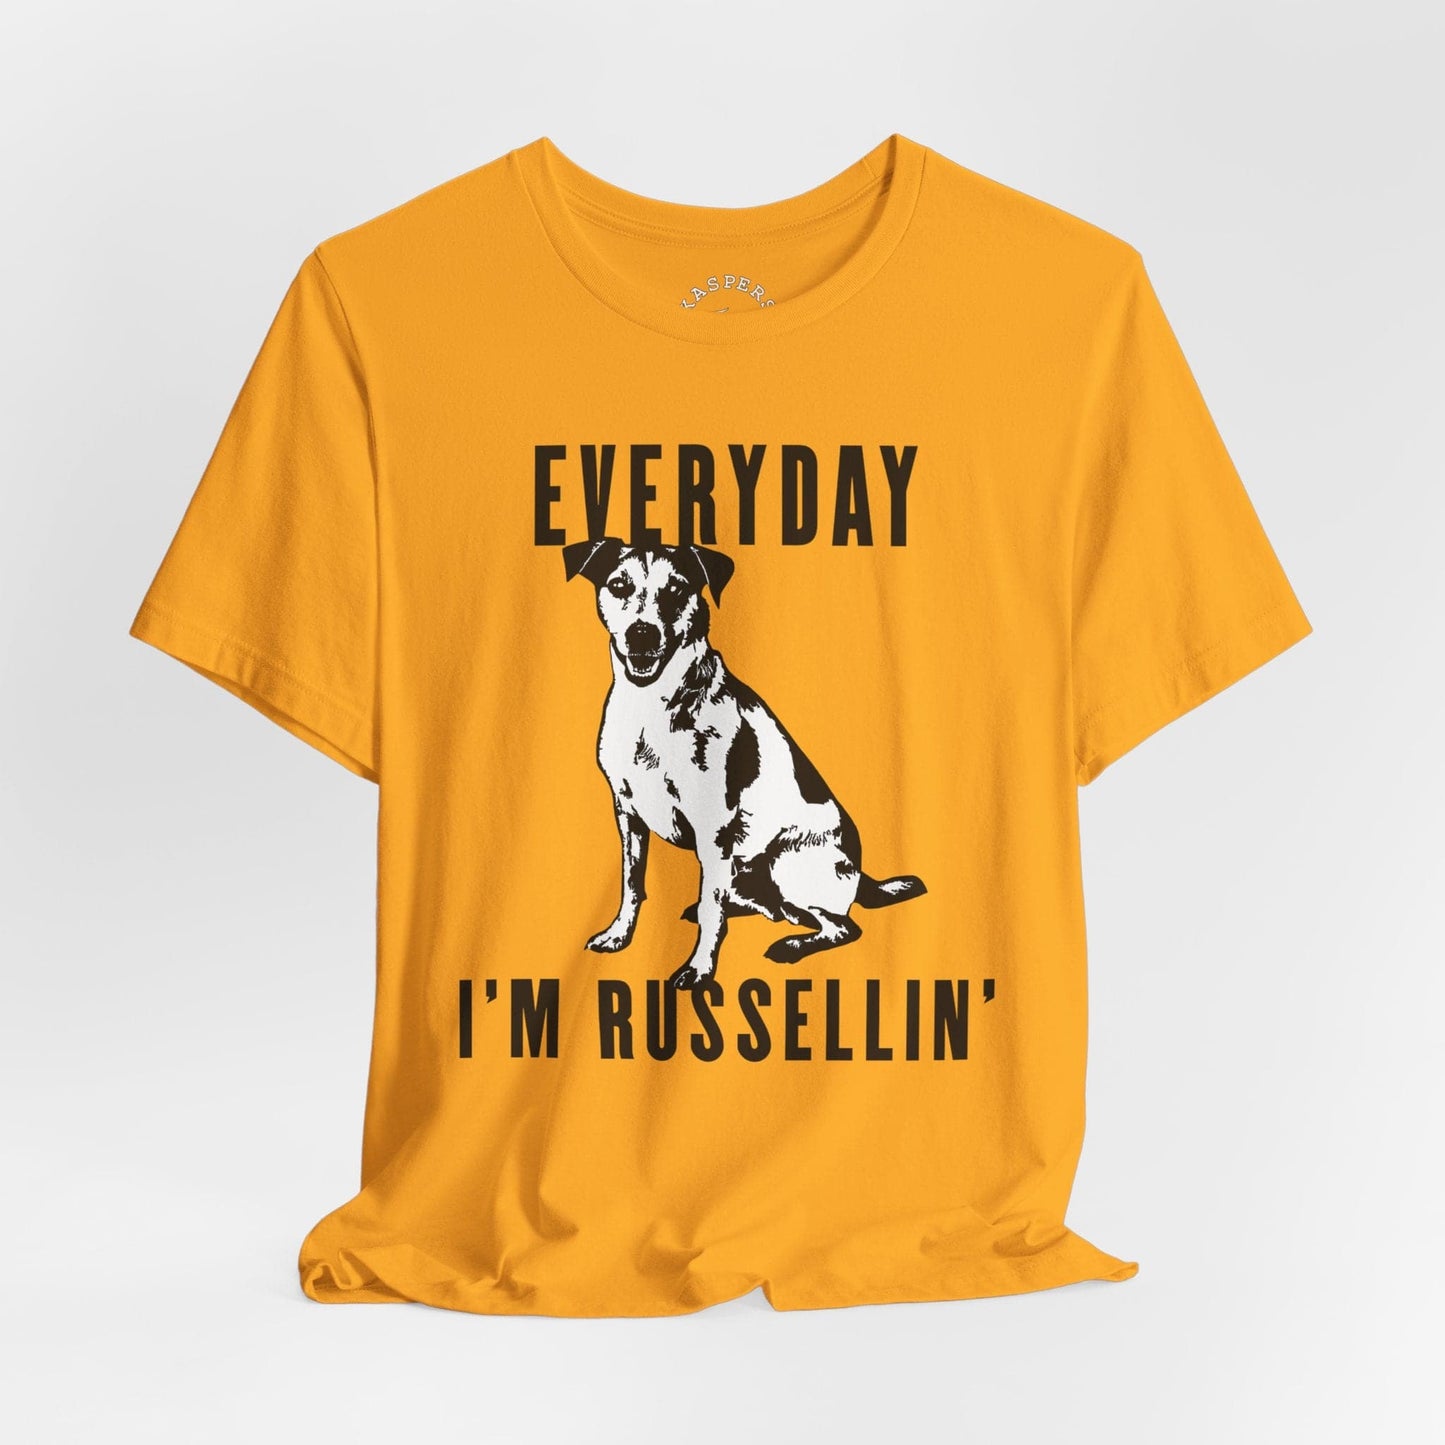 Everyday I'm Russellin' T-Shirt